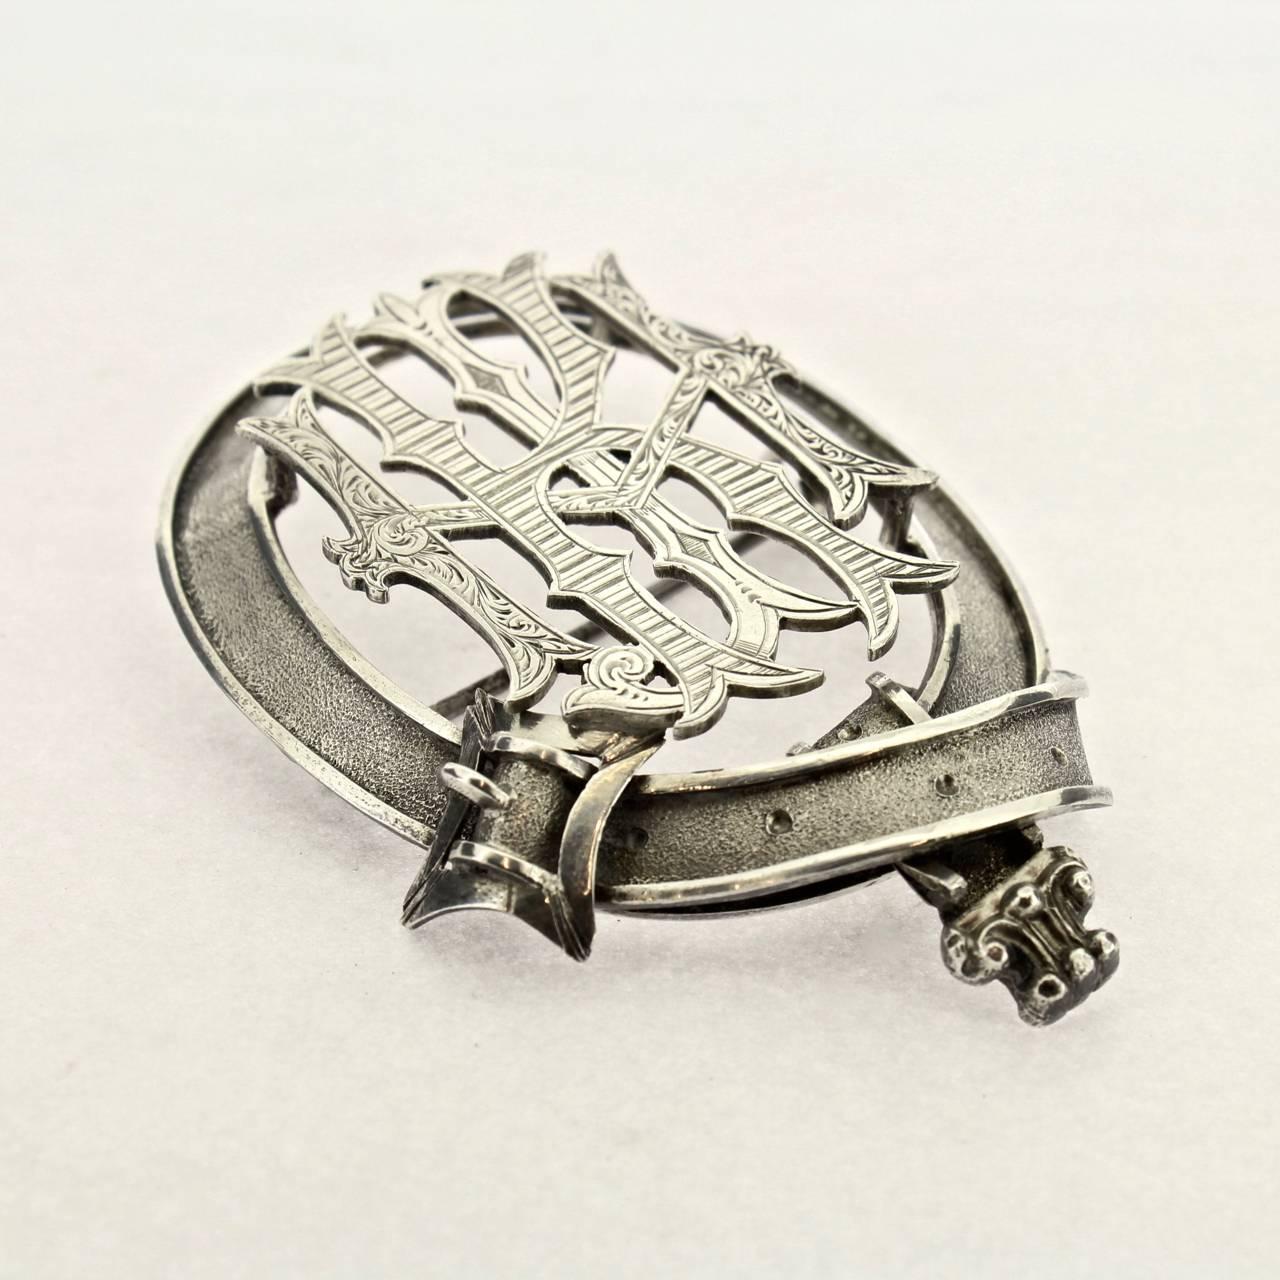 Large Antique Cased Figural Victorian Silver Buckle Brooch In Good Condition For Sale In Philadelphia, PA